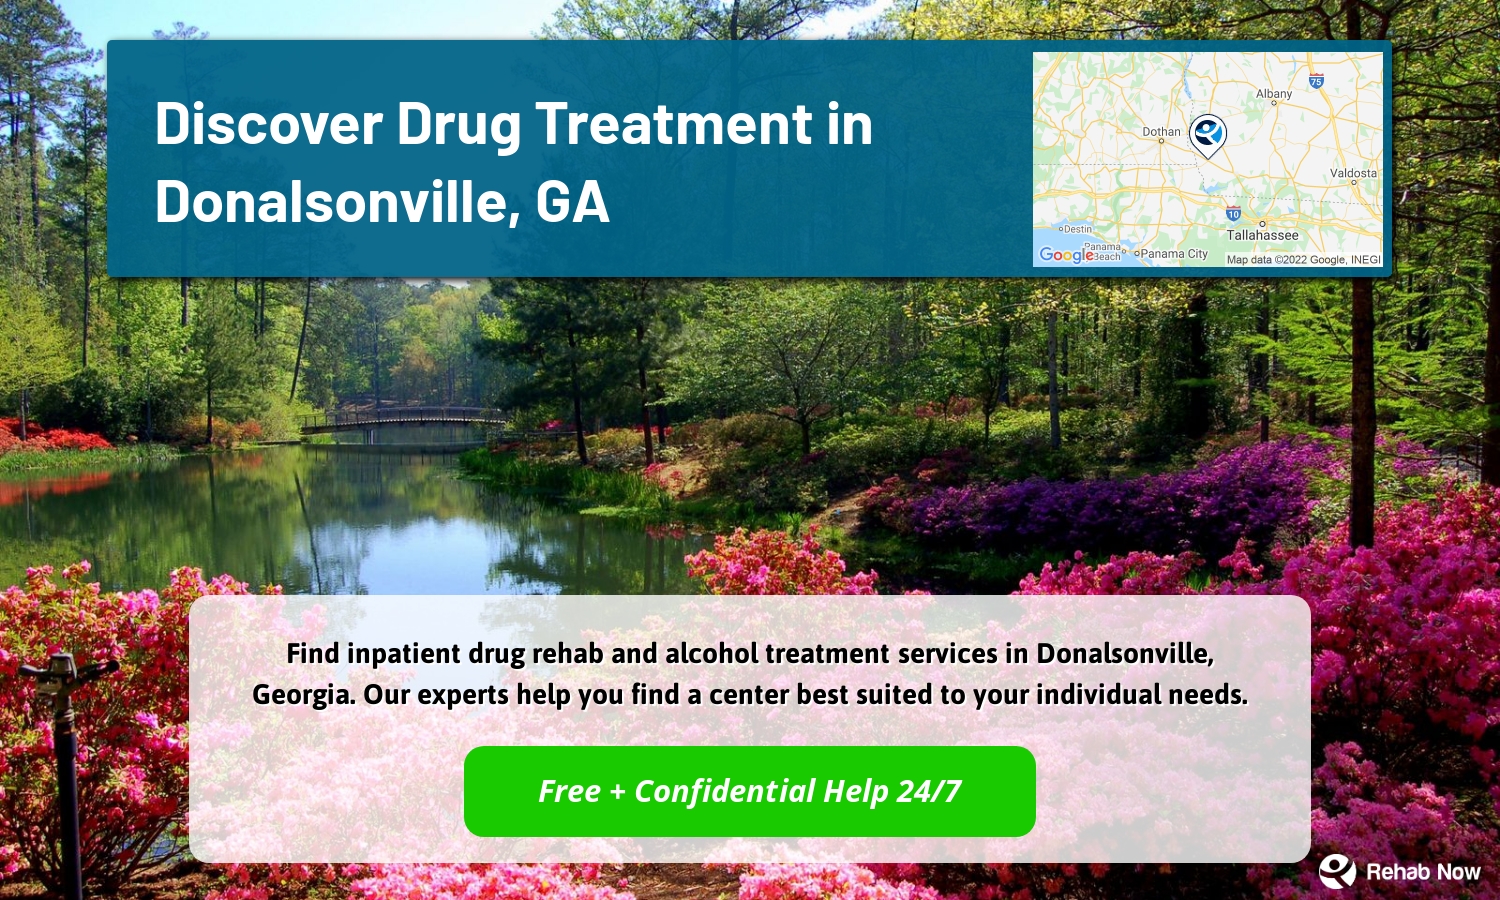 Find inpatient drug rehab and alcohol treatment services in Donalsonville, Georgia. Our experts help you find a center best suited to your individual needs.